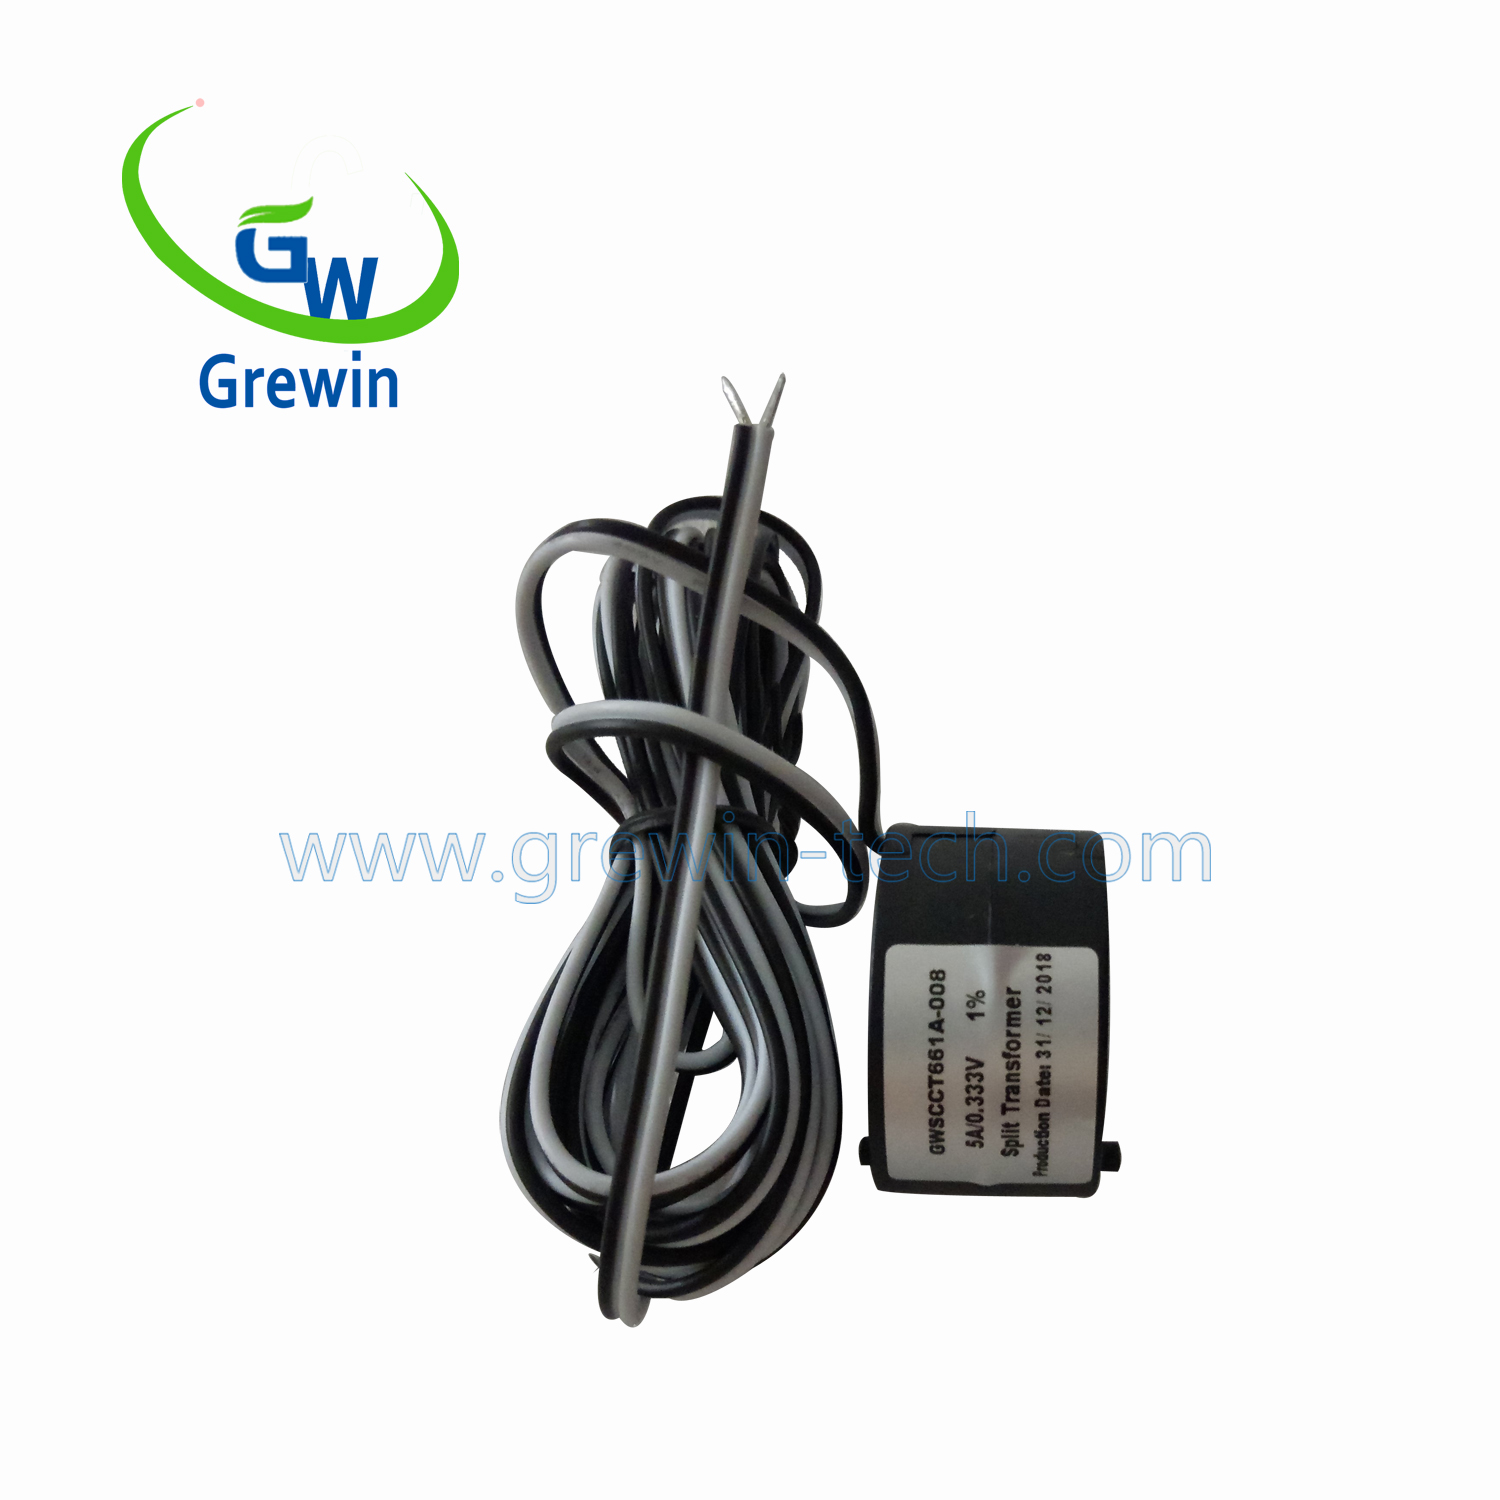 GWSCCT661Rated Input 0.5-630A Output 0-500mA/0.333V split core toroidal current transformer for Current measurement 